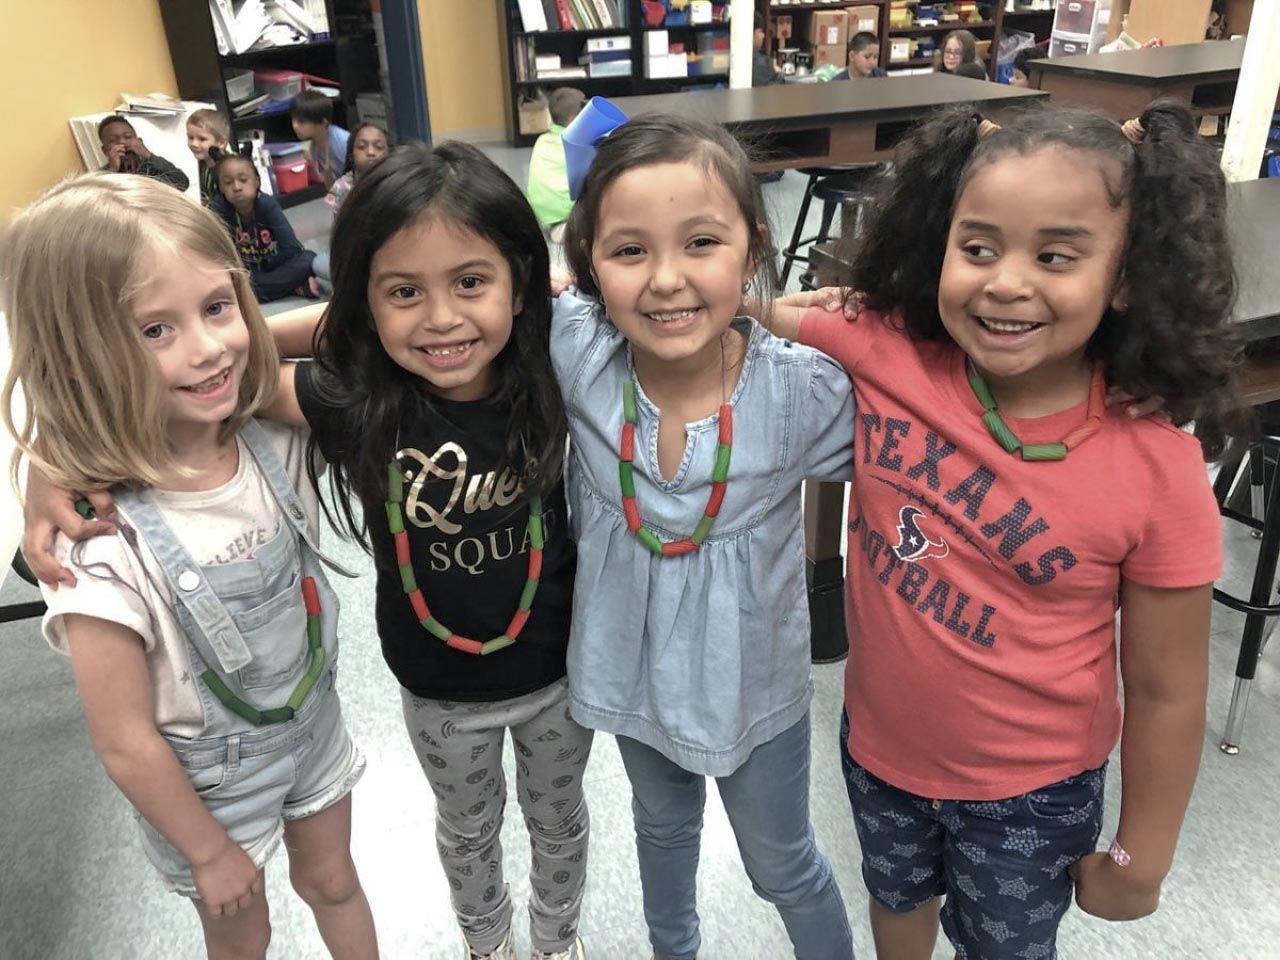 Four young girls stand together with their arms over each other's shoulders in a line. The two girls on the left have their hair down, while the third has her dark hair in a ponytail, and the front has in curly pigtails. All four girls are smiling at the camera during afterschool care.